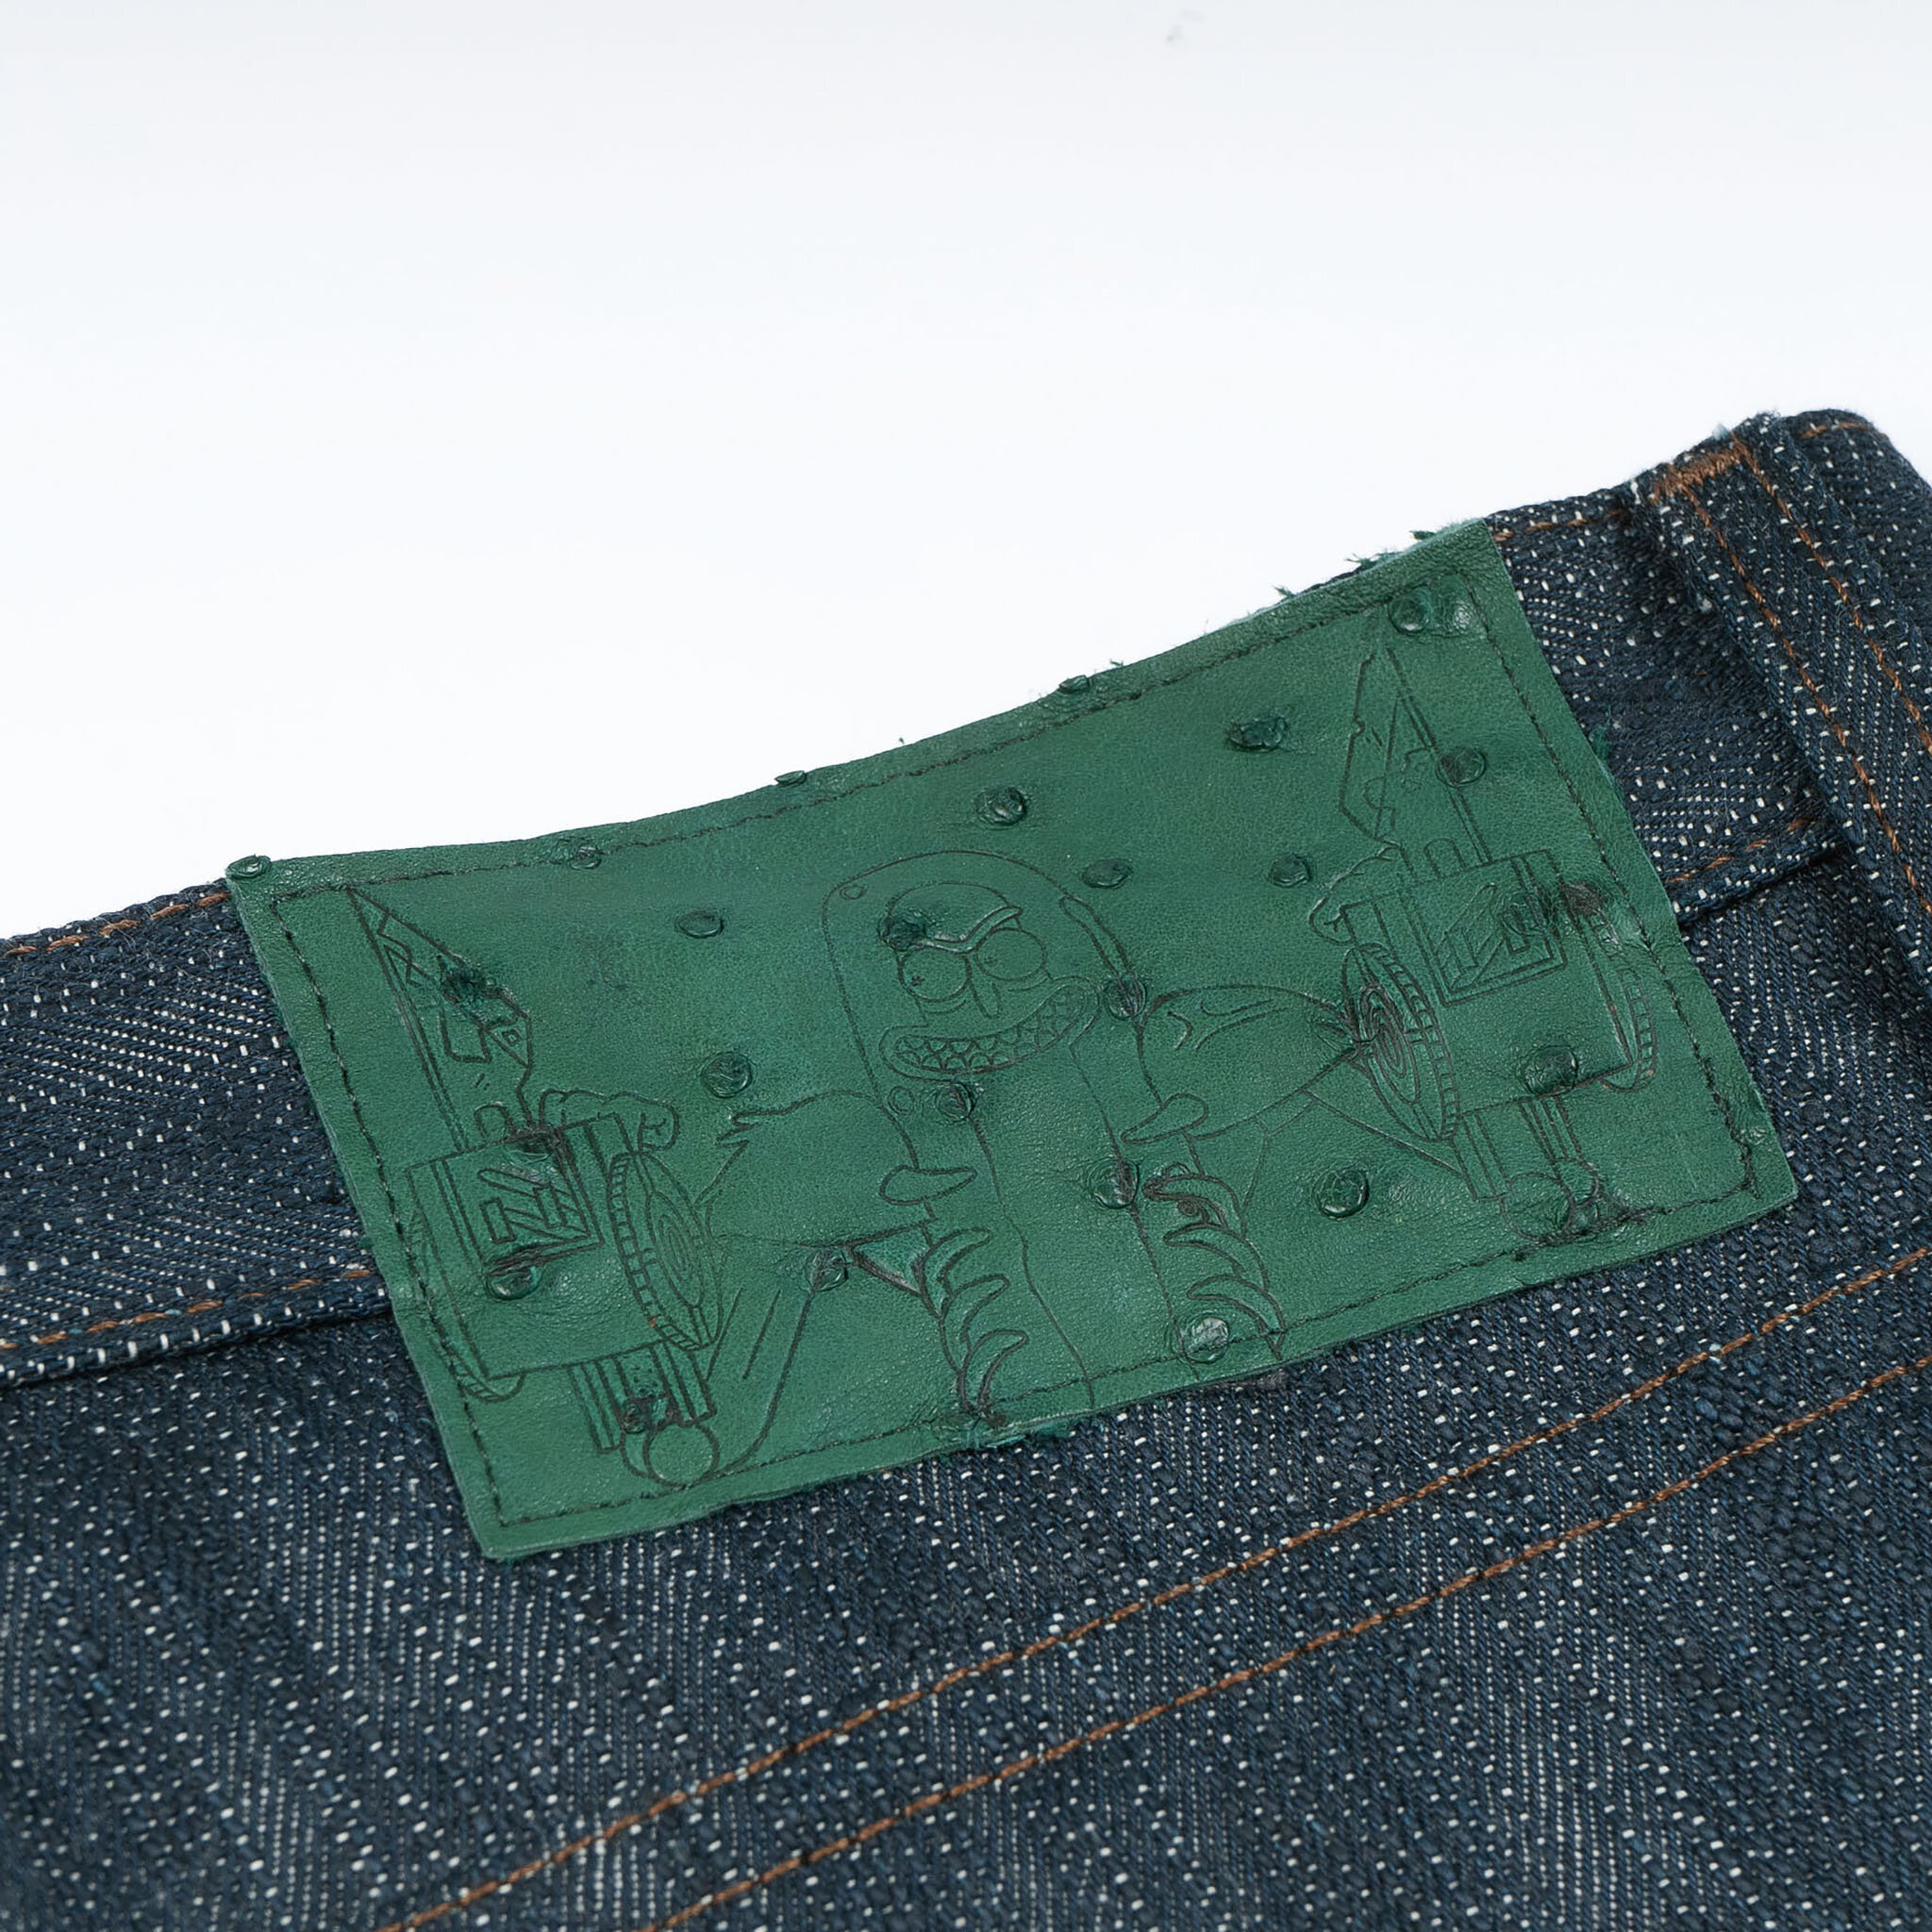  Picckle Rick “Solenya” Selvedge jeans - leather patch 